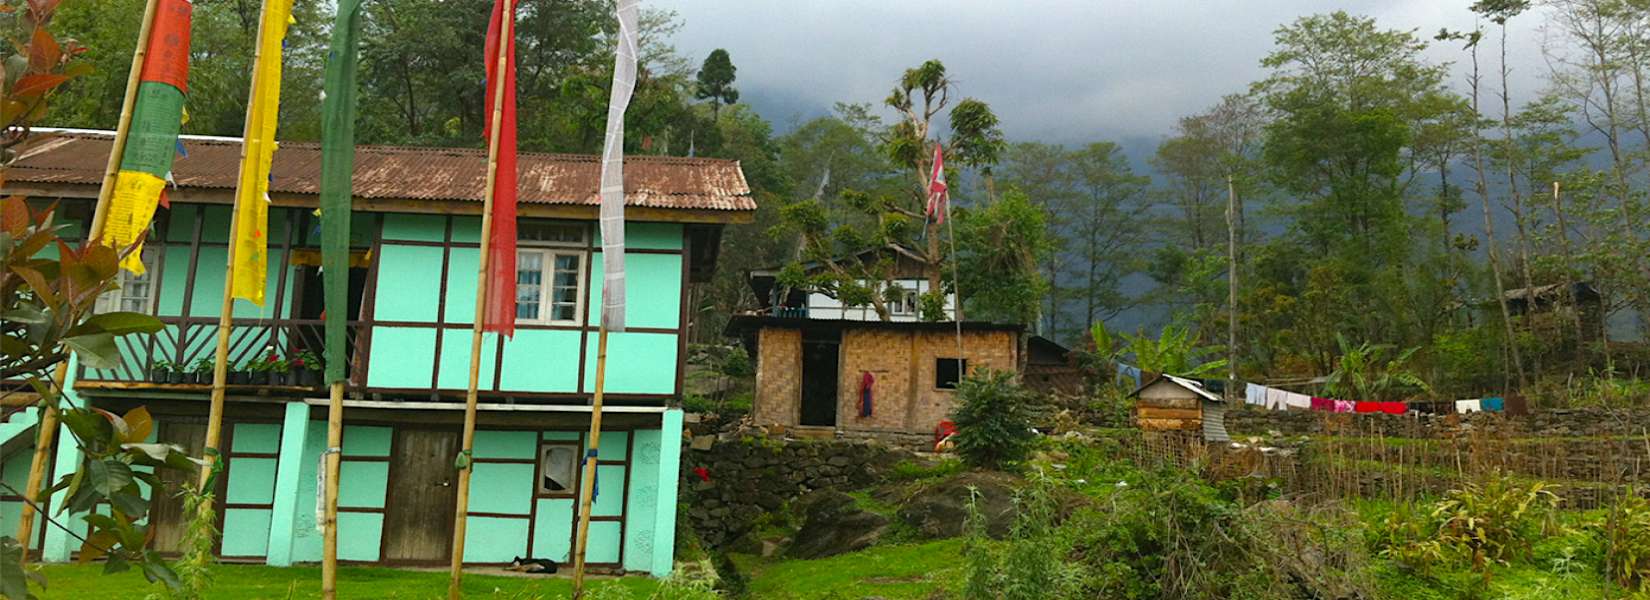 Yaksum West Sikkim - The historical town